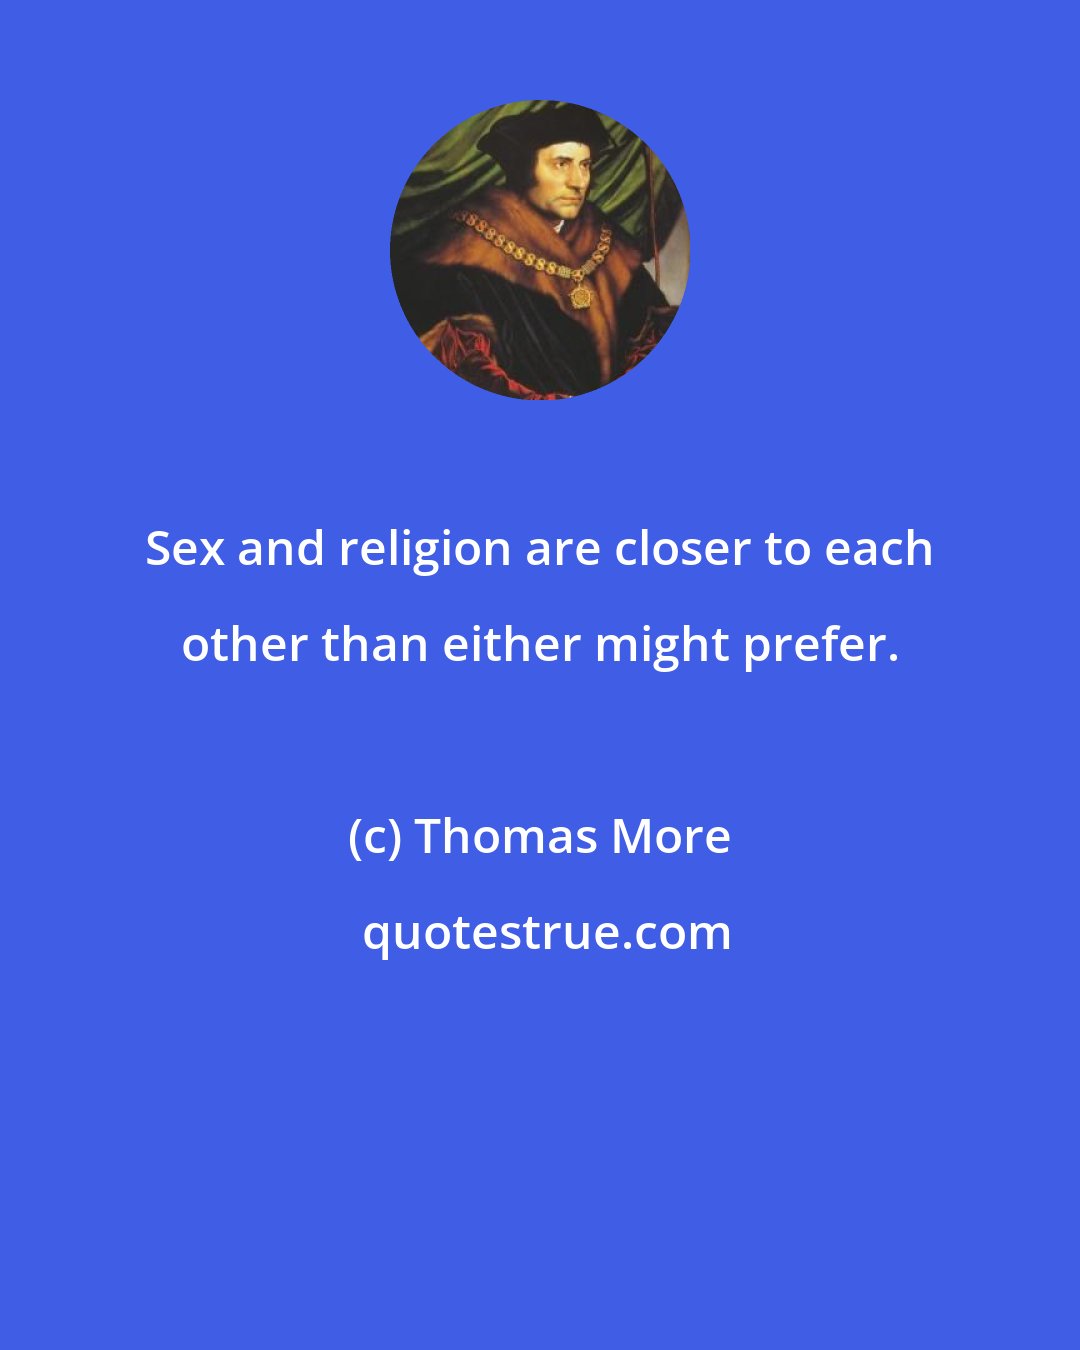 Thomas More: Sex and religion are closer to each other than either might prefer.